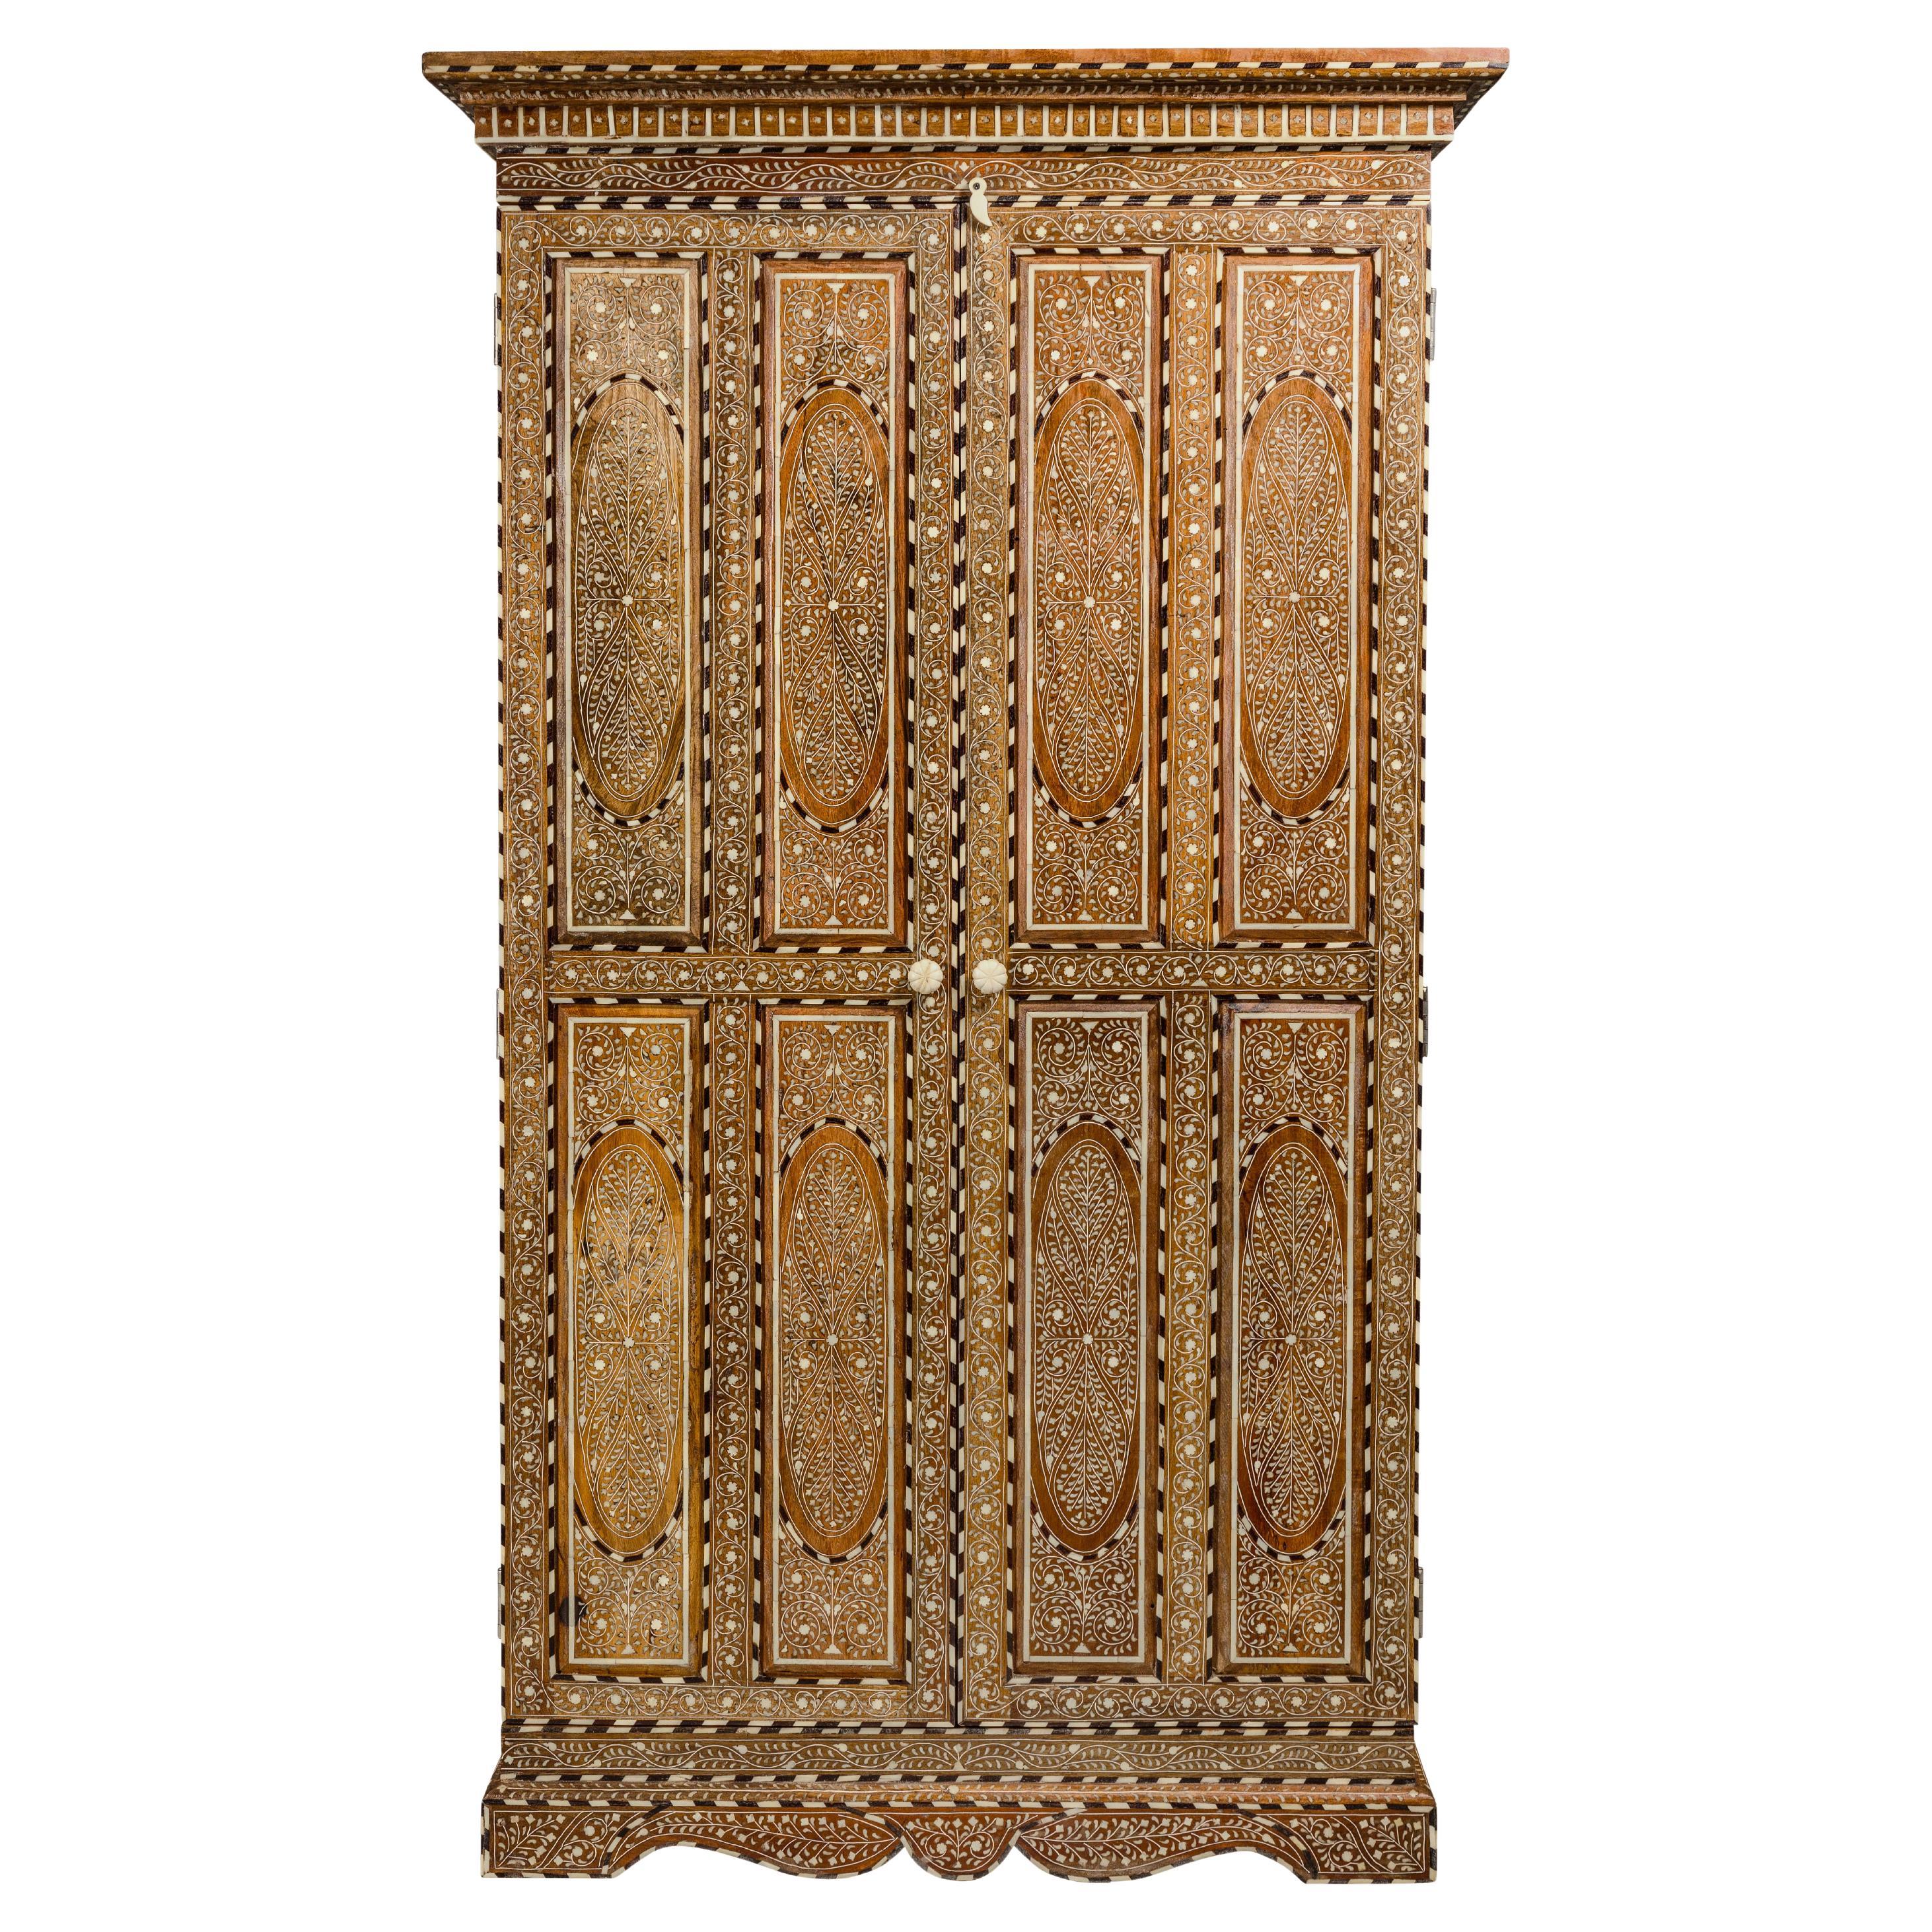 Anglo Indian Style Mango Wood Tall Cabinet with Floral Themed Bone Inlaid Décor